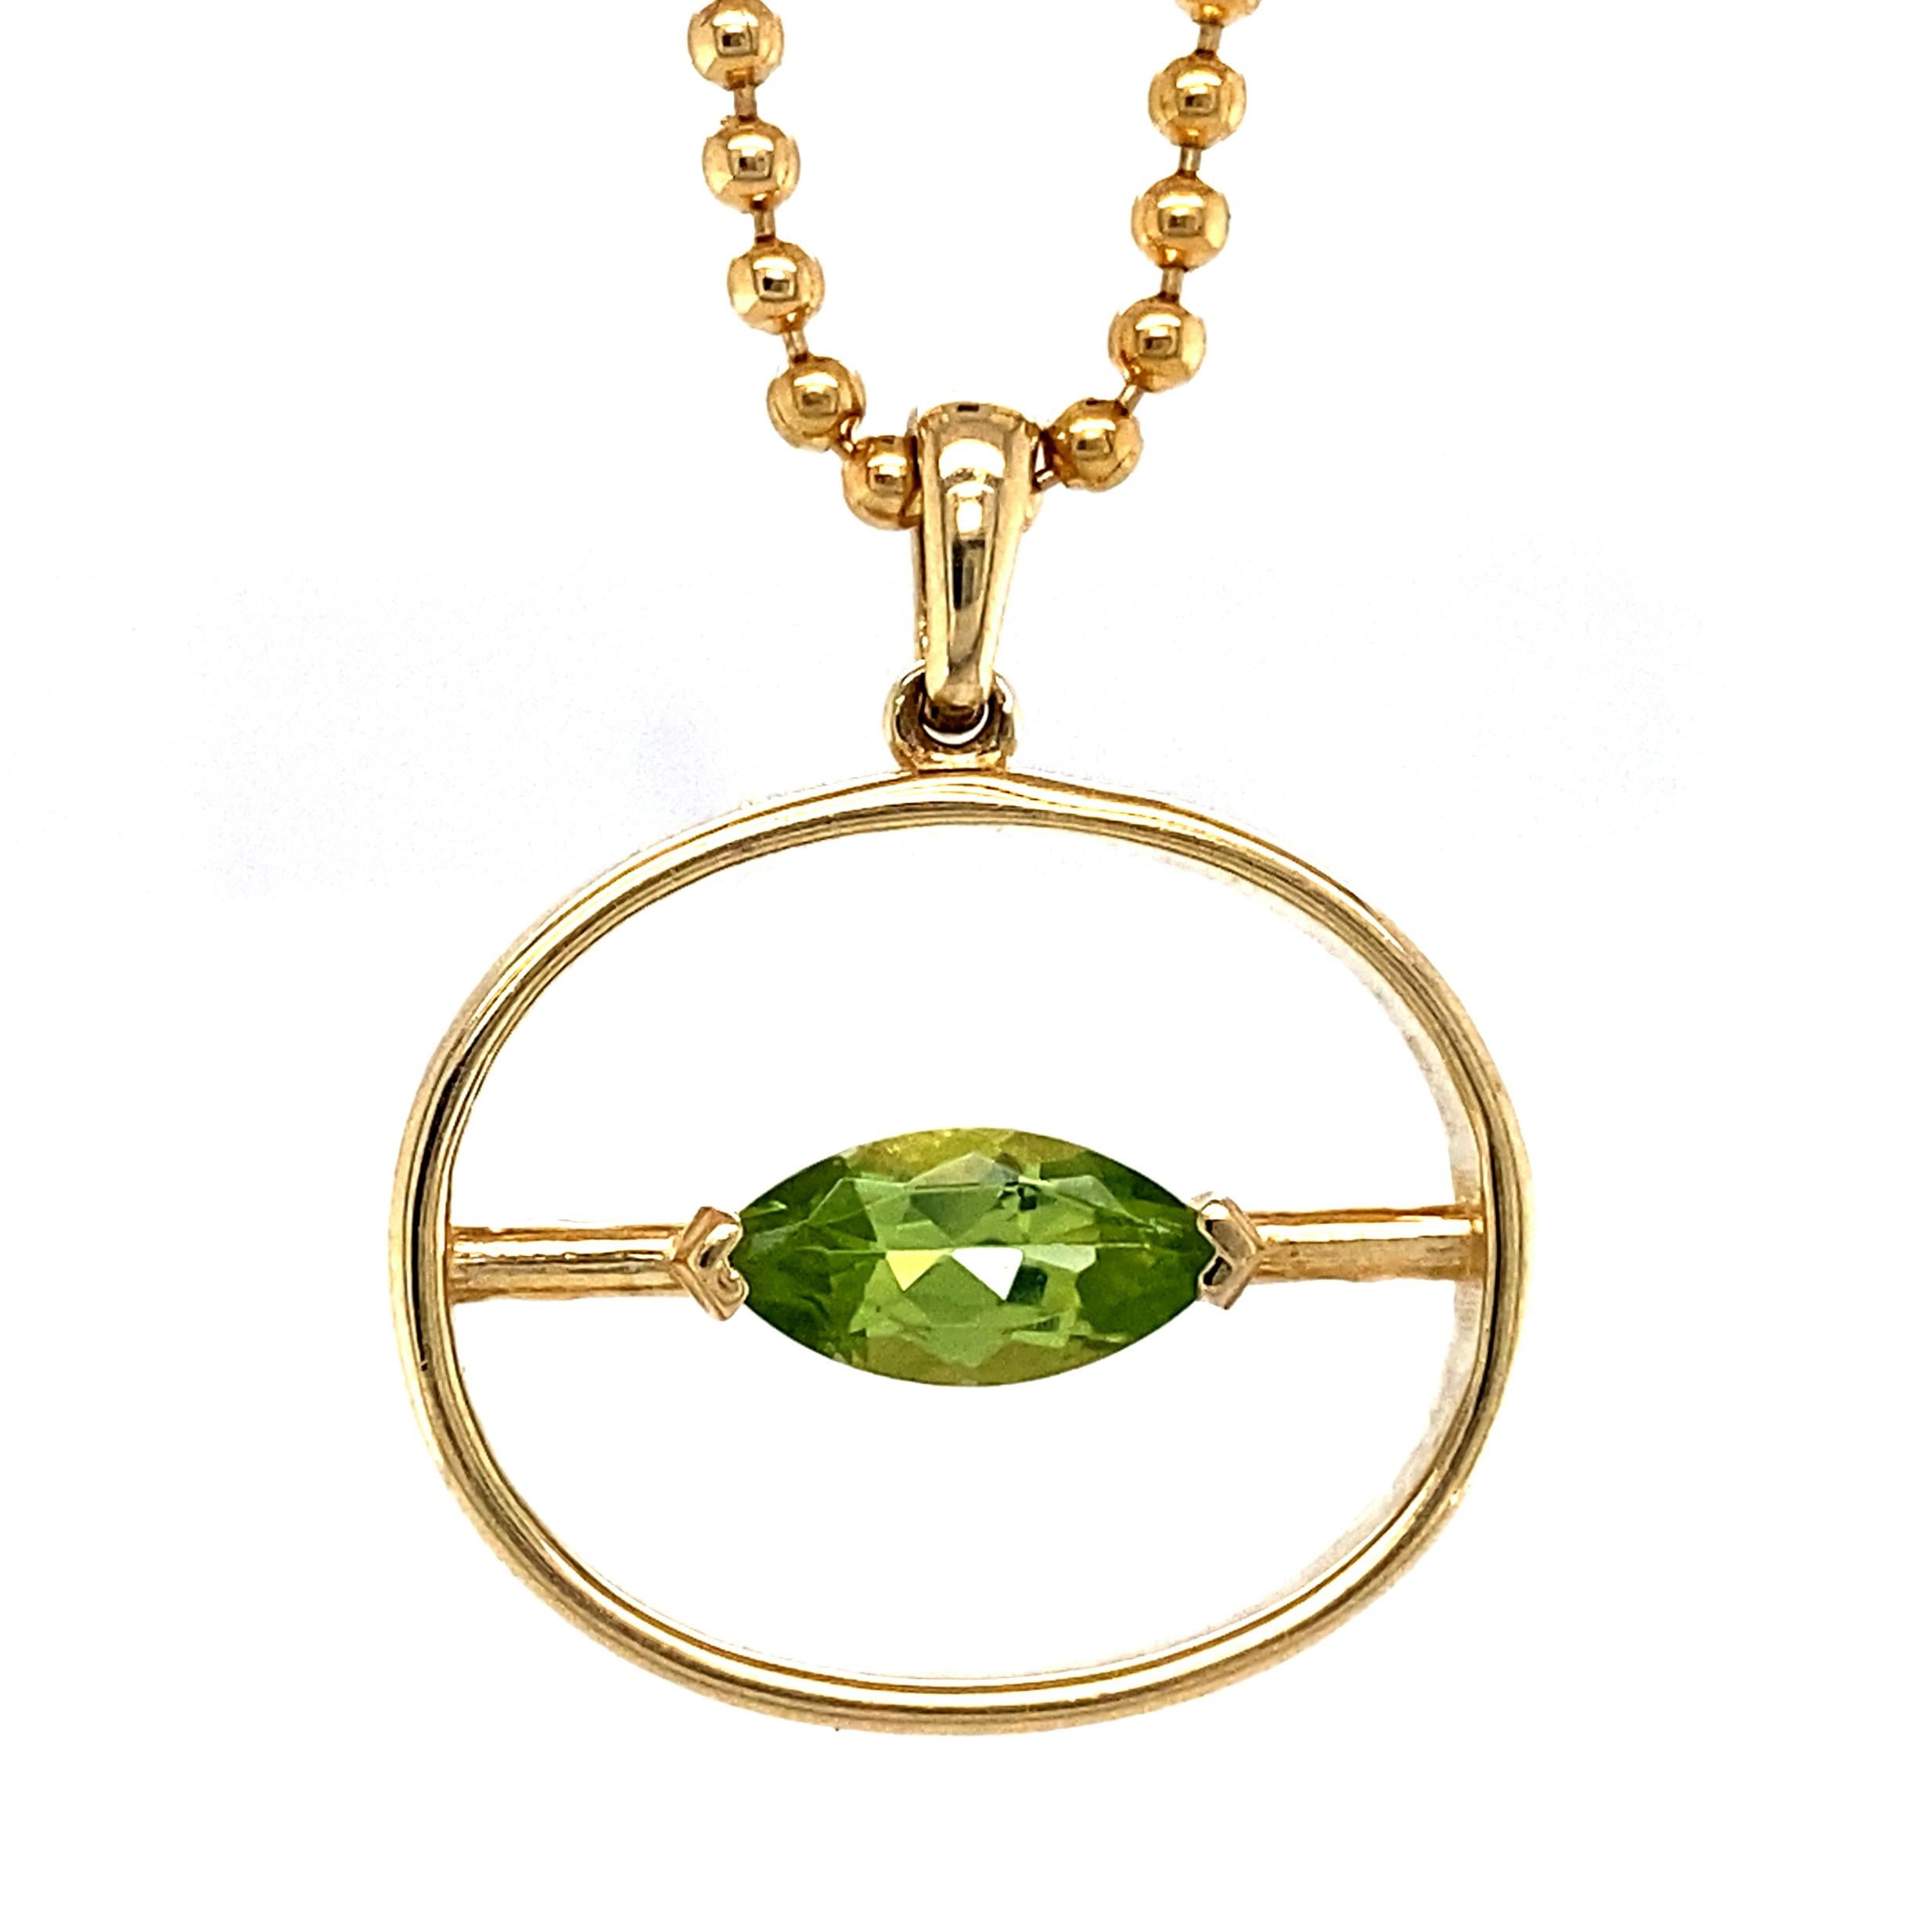 A vividly green 1/2 carat peridot sits in a clean little pronged basket mounted at the center of this inverted oval pendant by Eytan Brandes.

The resemblance to a lowercase Greek theta makes this the perfect signature piece for mathematicians,